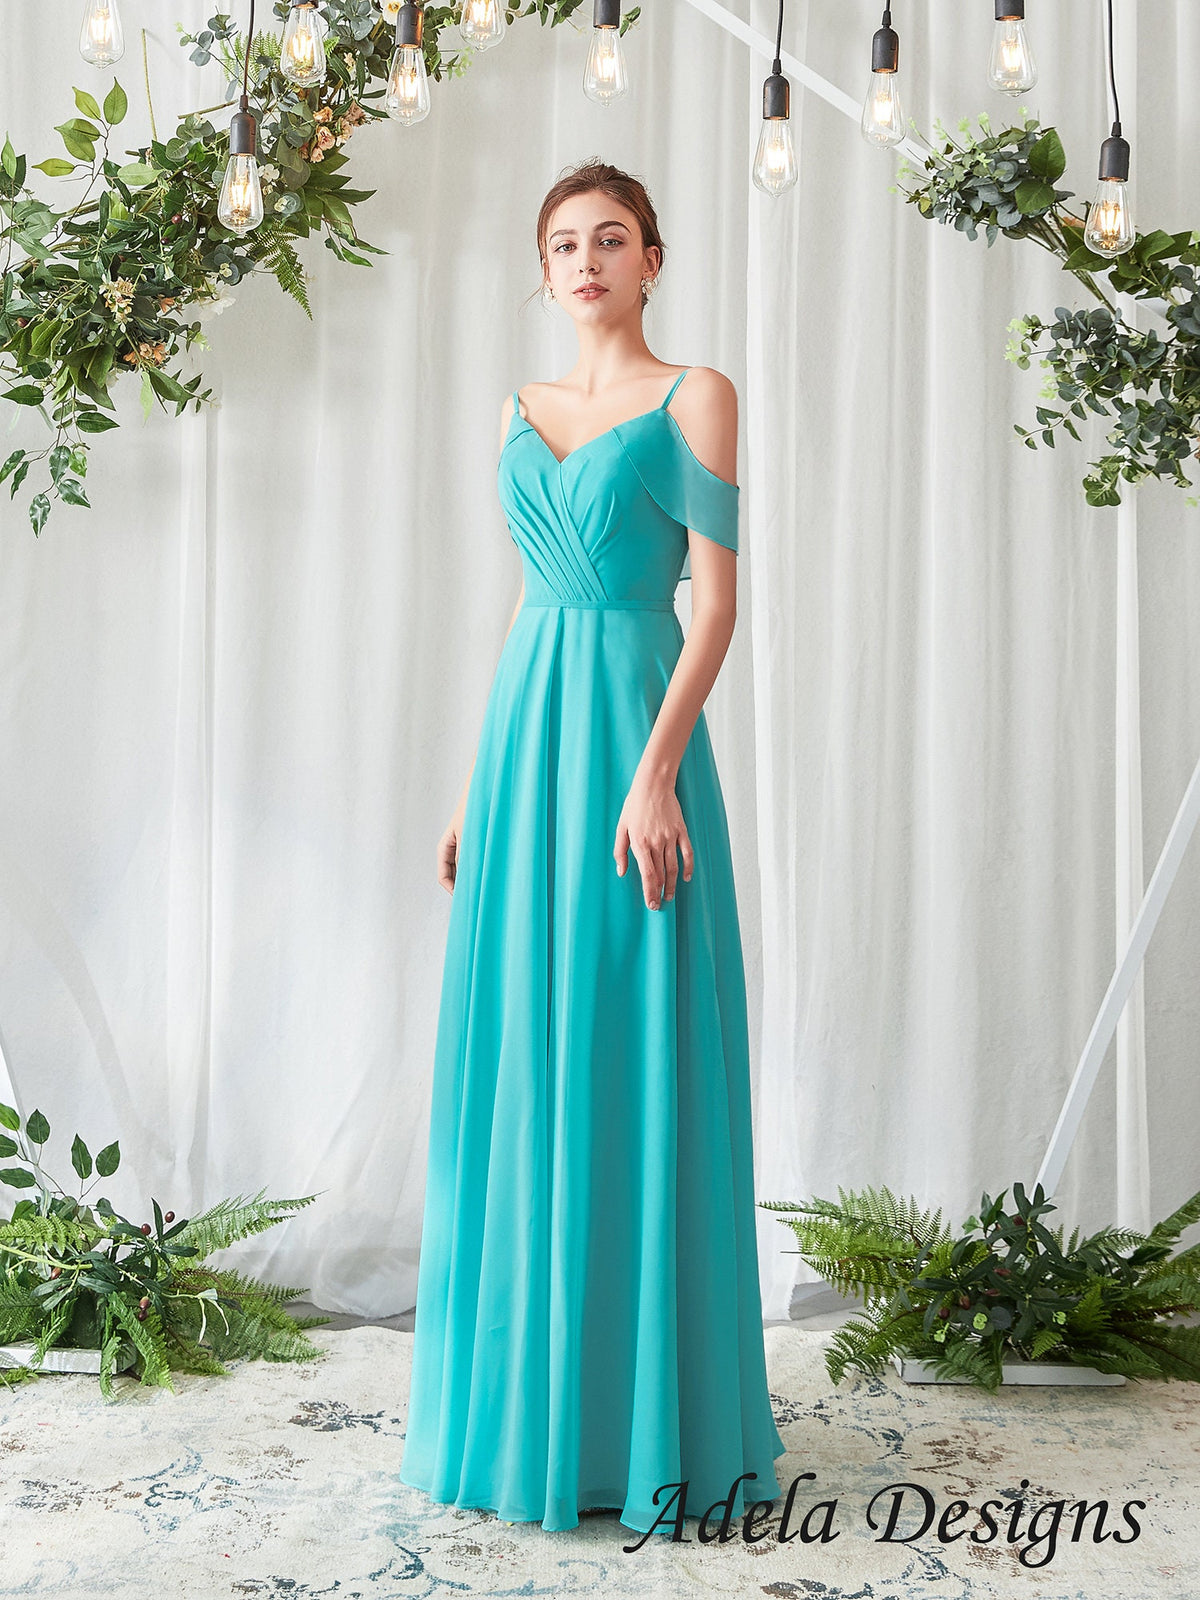 Cold Shoulder Sleeves Boho Bridesmaid Dress Formal Gown Prom Evening Gala Dress Aline Chiffon Fabric V Neck Open Back Beach Style Flowy